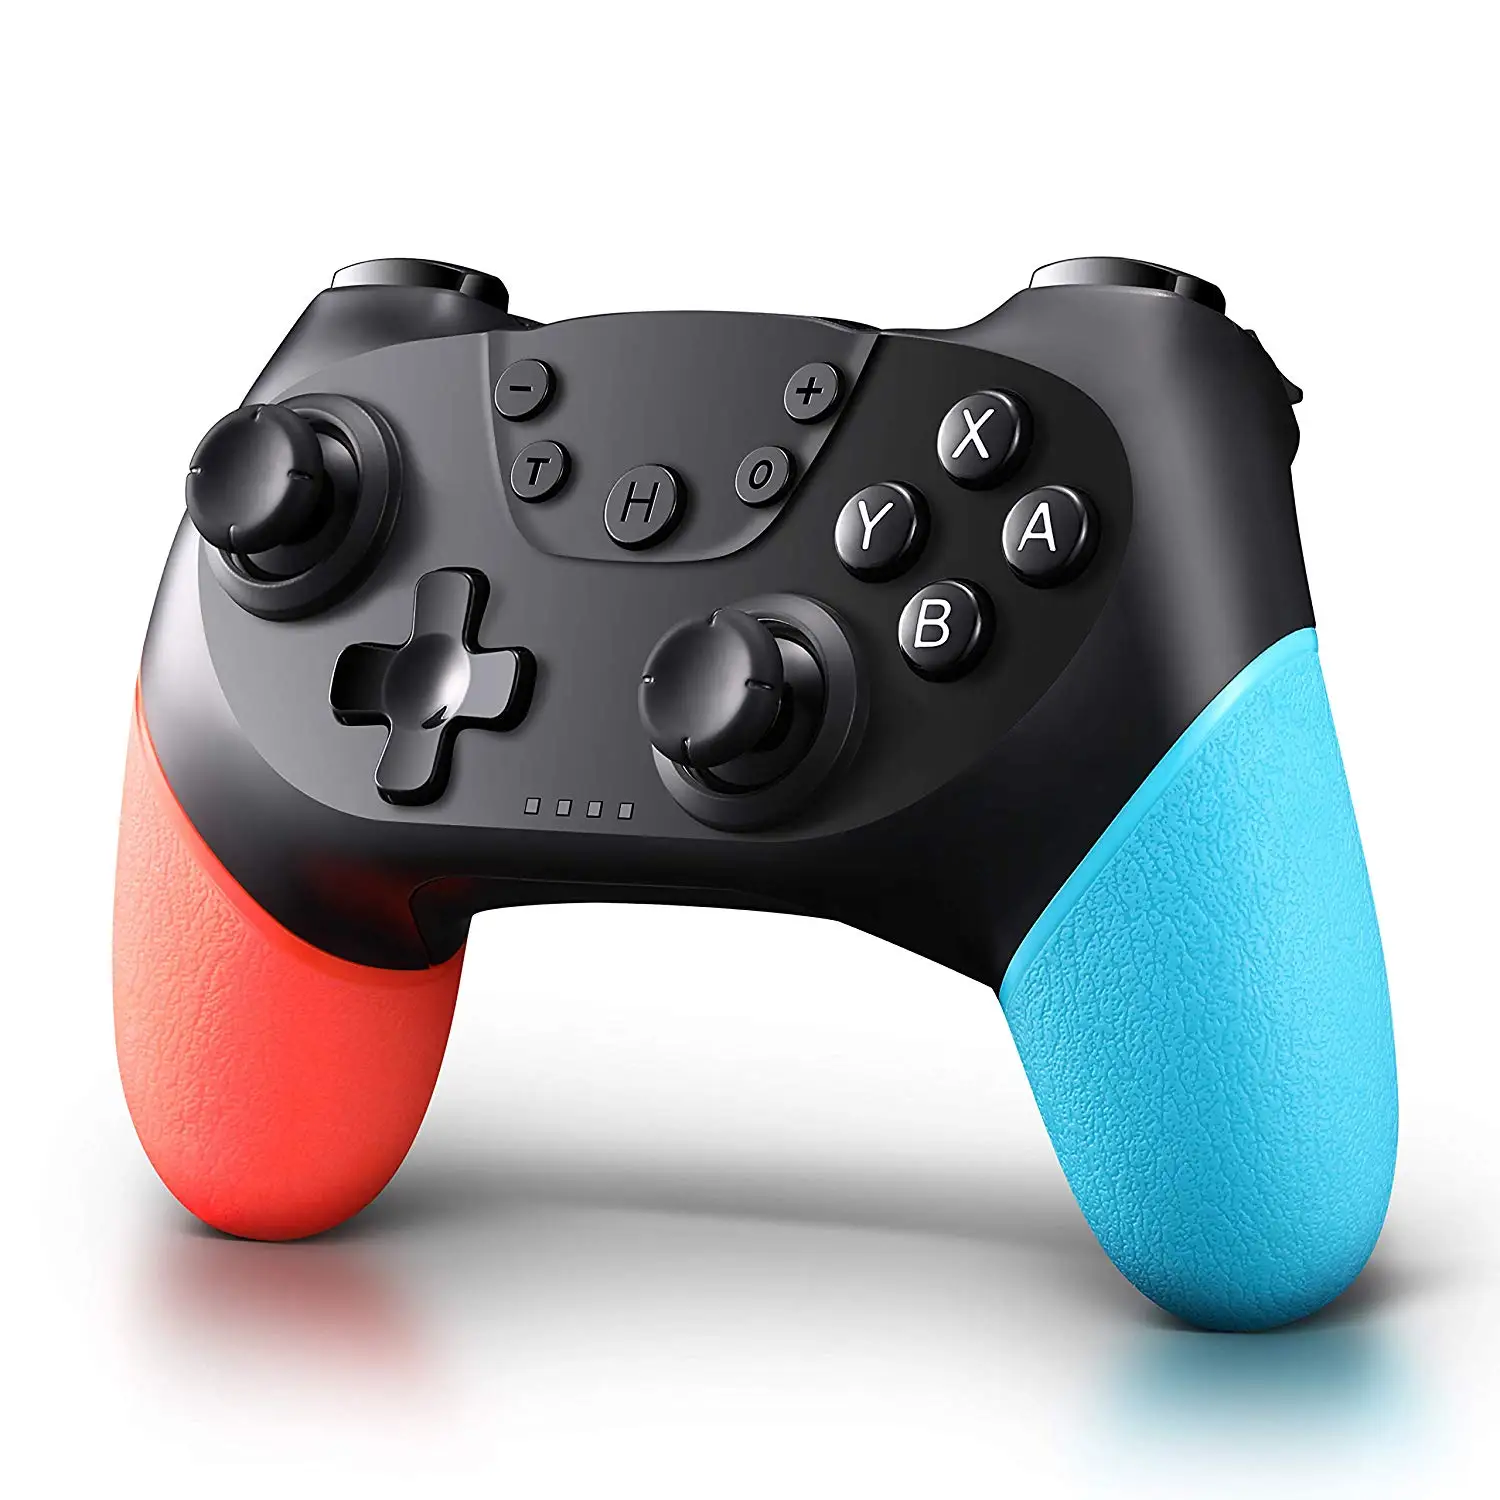 best buy switch controller